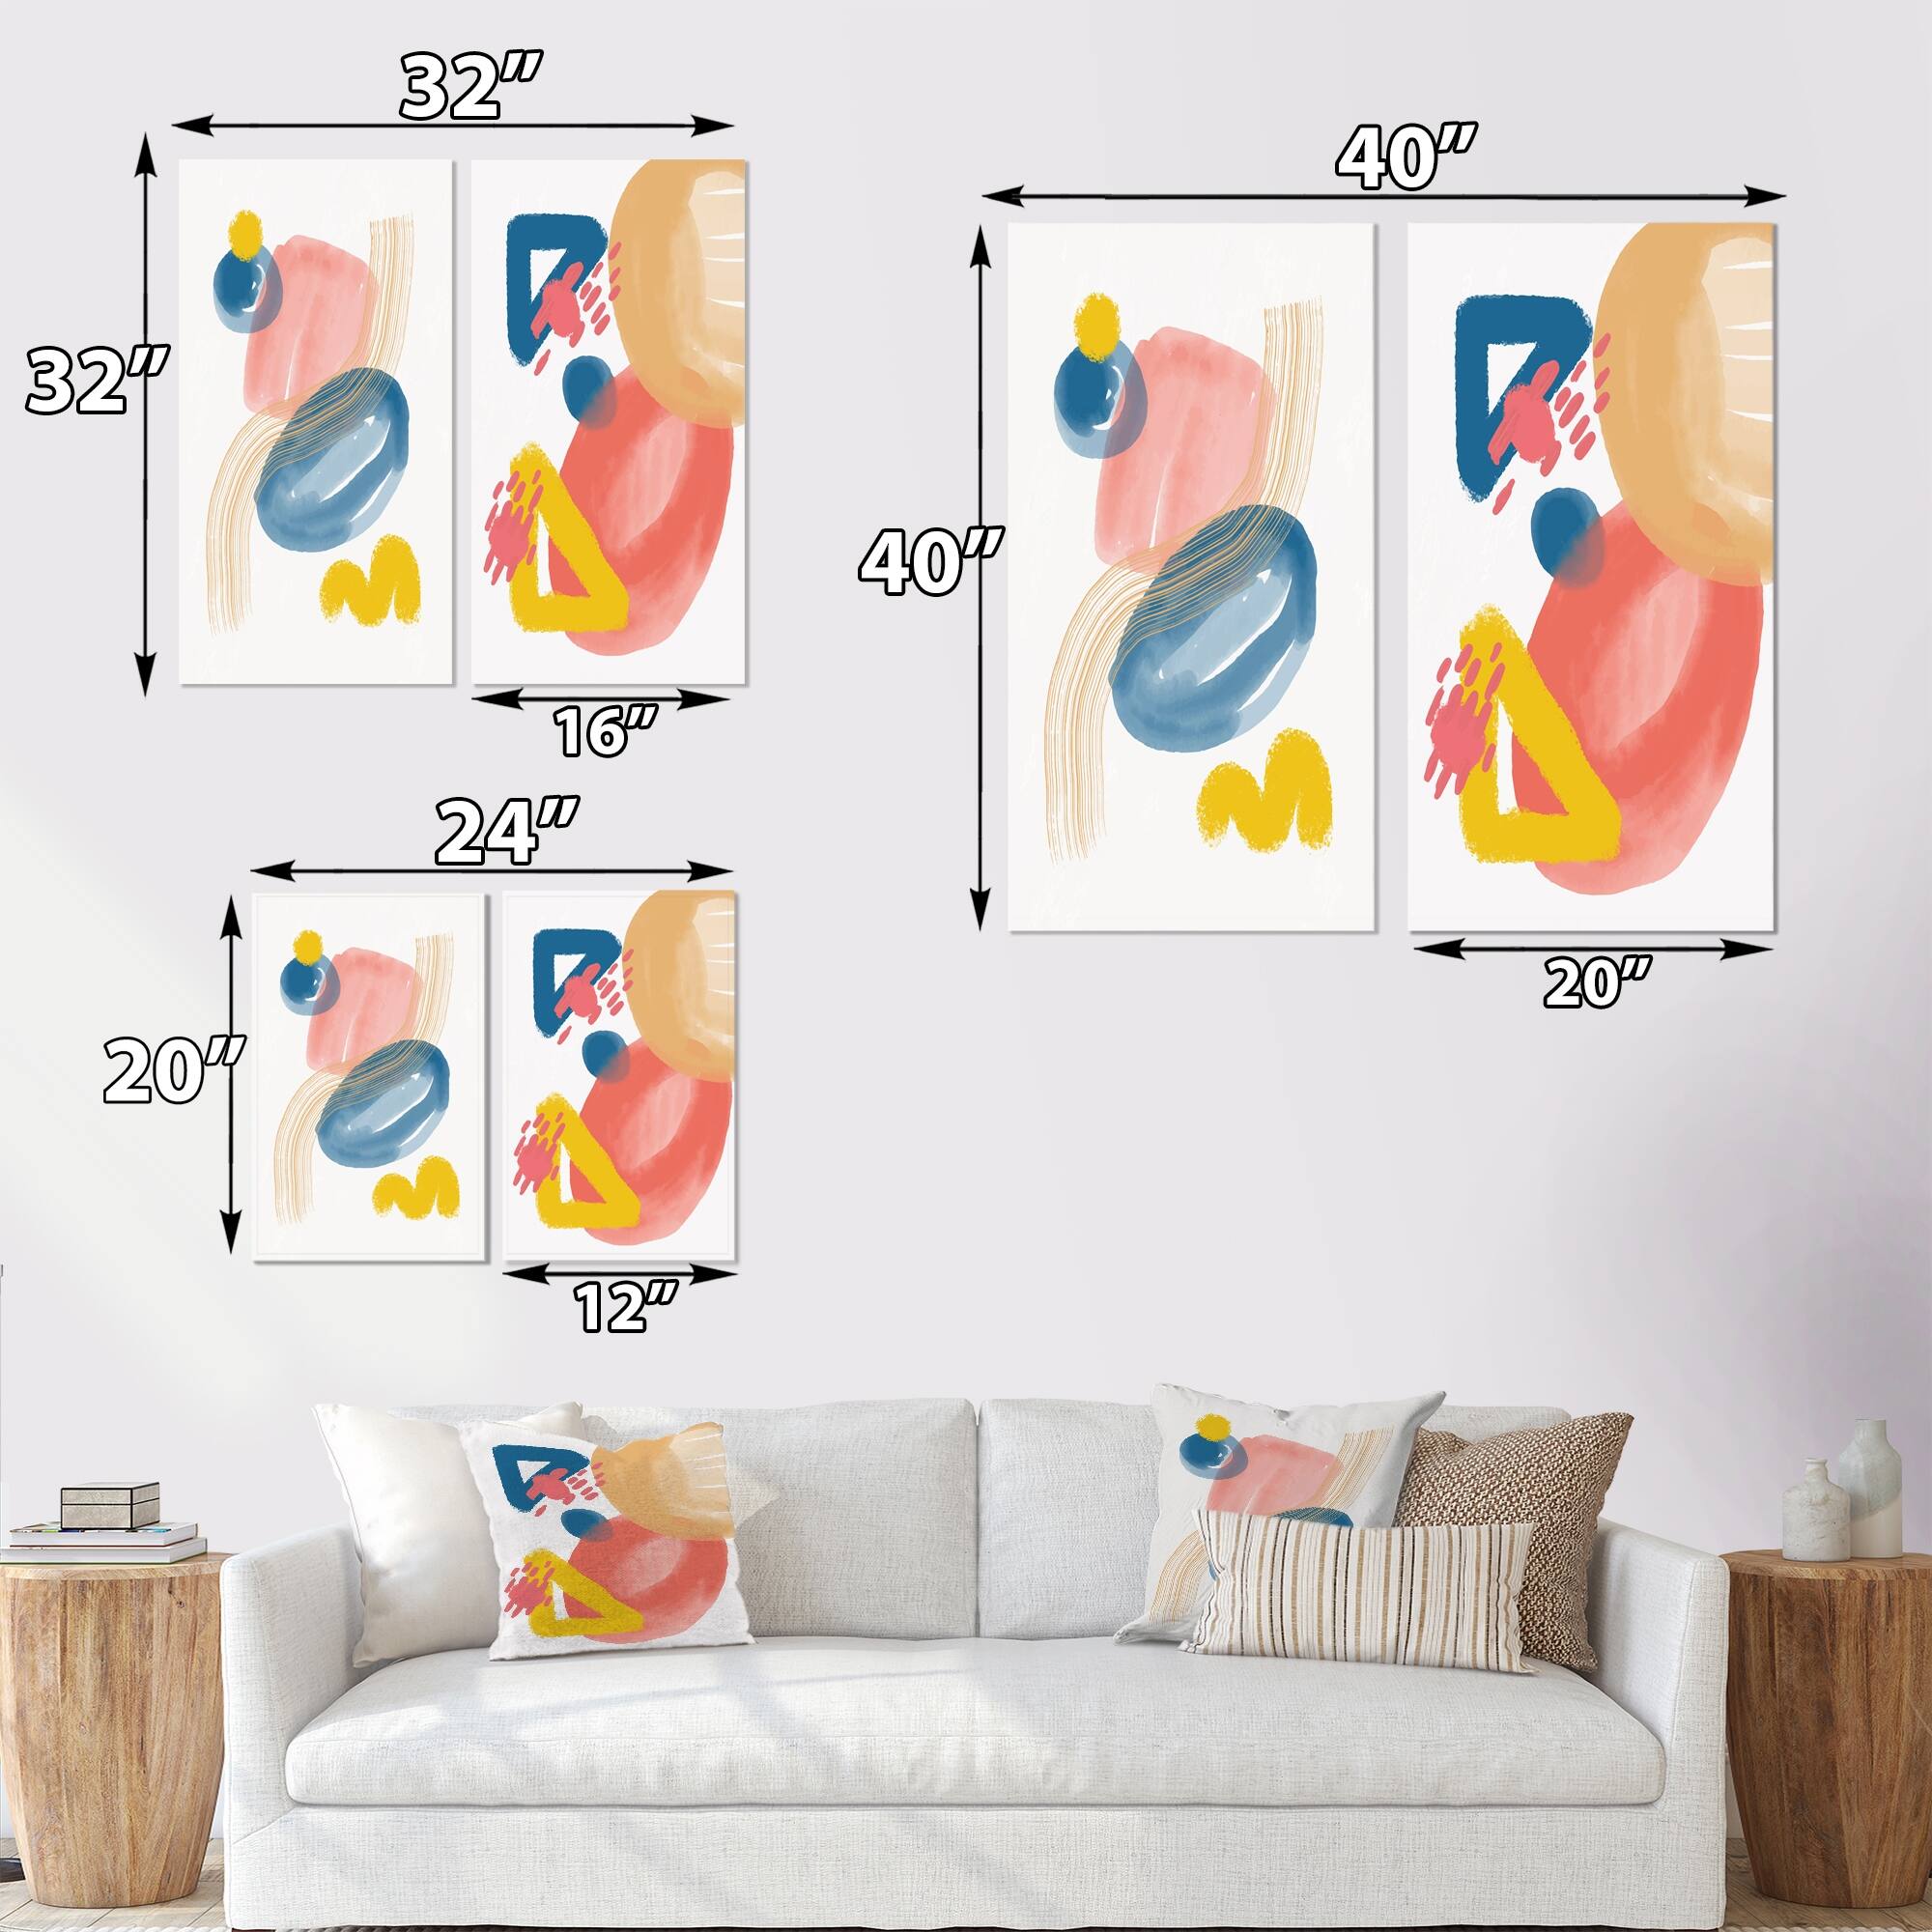 Designart 'Abstract Organic Shapes In Retro Gradients II' Abstract Set ...